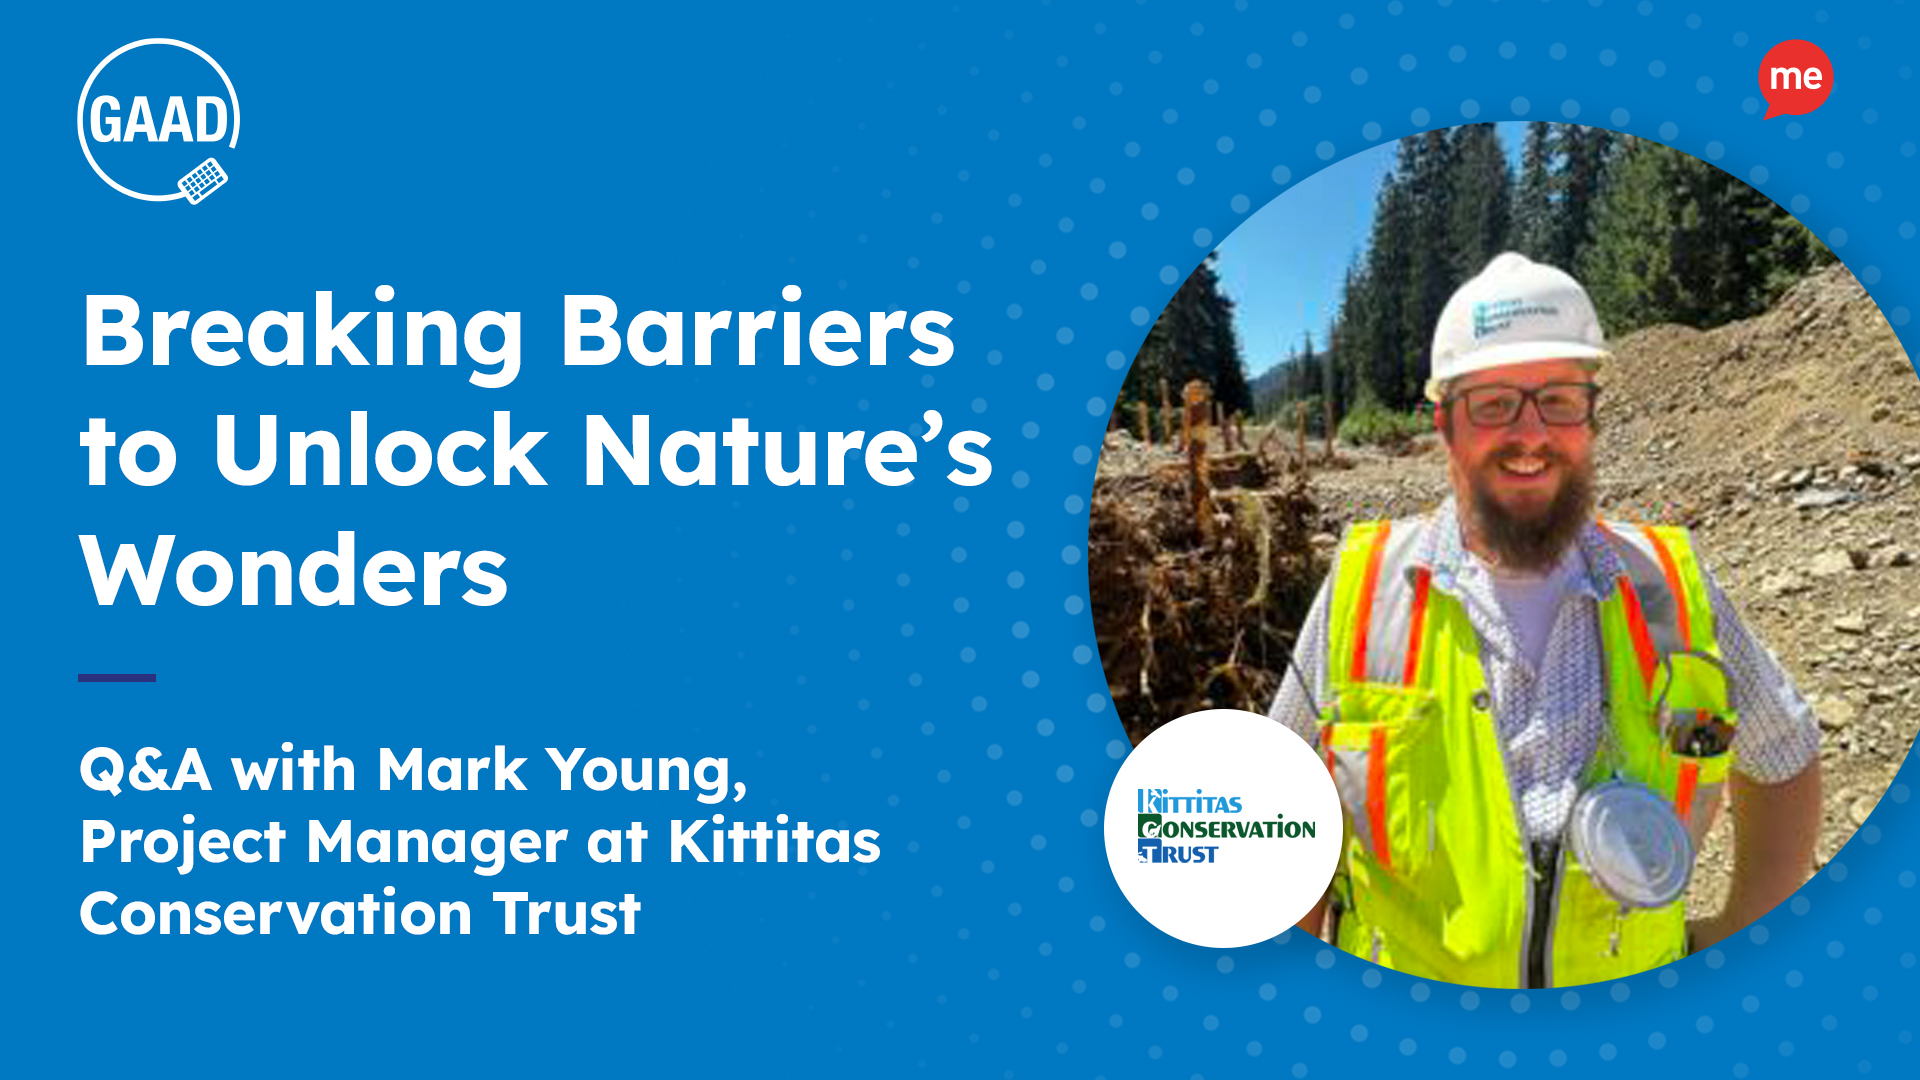 Breaking Barriers to Unlock Nature's Wonders. Q&A with Mark Young, Project Manager at Kittitas Conservation Trust with an image of Mark on a blue background